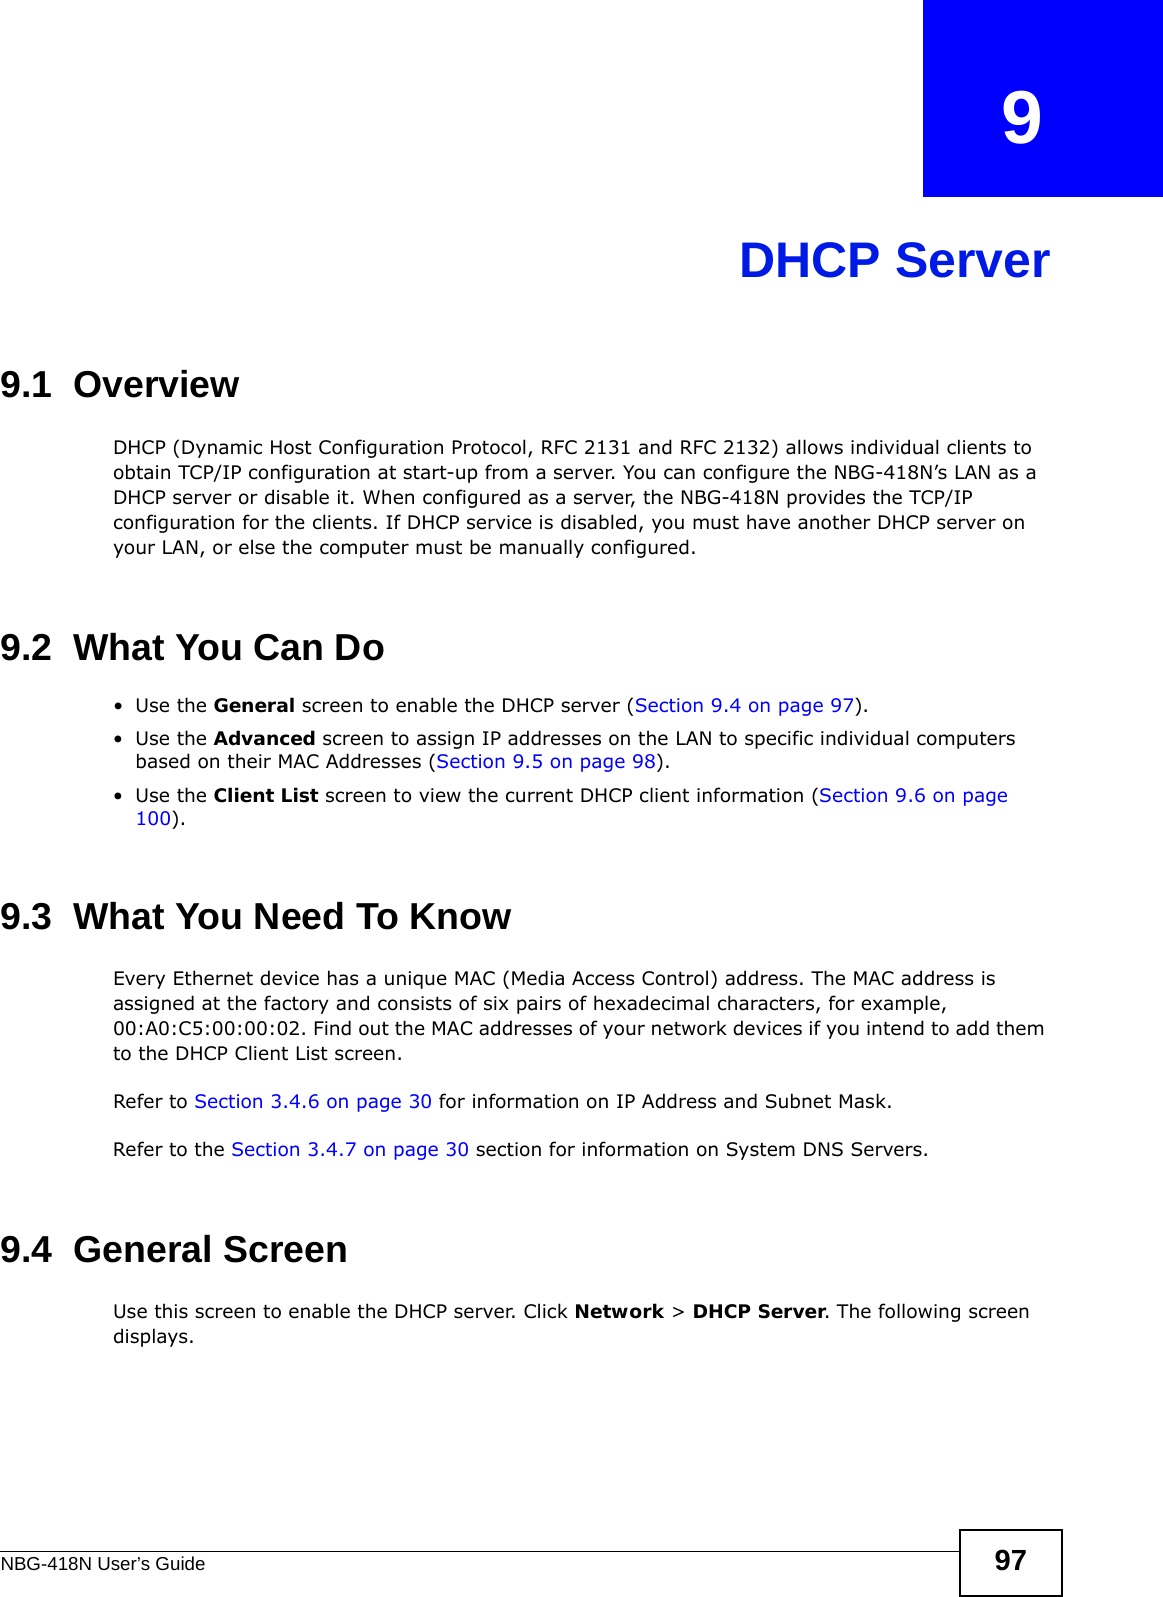 NBG-418N User’s Guide 97CHAPTER   9DHCP Server9.1  OverviewDHCP (Dynamic Host Configuration Protocol, RFC 2131 and RFC 2132) allows individual clients to obtain TCP/IP configuration at start-up from a server. You can configure the NBG-418N’s LAN as a DHCP server or disable it. When configured as a server, the NBG-418N provides the TCP/IP configuration for the clients. If DHCP service is disabled, you must have another DHCP server on your LAN, or else the computer must be manually configured.9.2  What You Can Do•Use the General screen to enable the DHCP server (Section 9.4 on page 97).•Use the Advanced screen to assign IP addresses on the LAN to specific individual computers based on their MAC Addresses (Section 9.5 on page 98).•Use the Client List screen to view the current DHCP client information (Section 9.6 on page 100). 9.3  What You Need To KnowEvery Ethernet device has a unique MAC (Media Access Control) address. The MAC address is assigned at the factory and consists of six pairs of hexadecimal characters, for example, 00:A0:C5:00:00:02. Find out the MAC addresses of your network devices if you intend to add them to the DHCP Client List screen.Refer to Section 3.4.6 on page 30 for information on IP Address and Subnet Mask.Refer to the Section 3.4.7 on page 30 section for information on System DNS Servers.9.4  General ScreenUse this screen to enable the DHCP server. Click Network &gt; DHCP Server. The following screen displays.